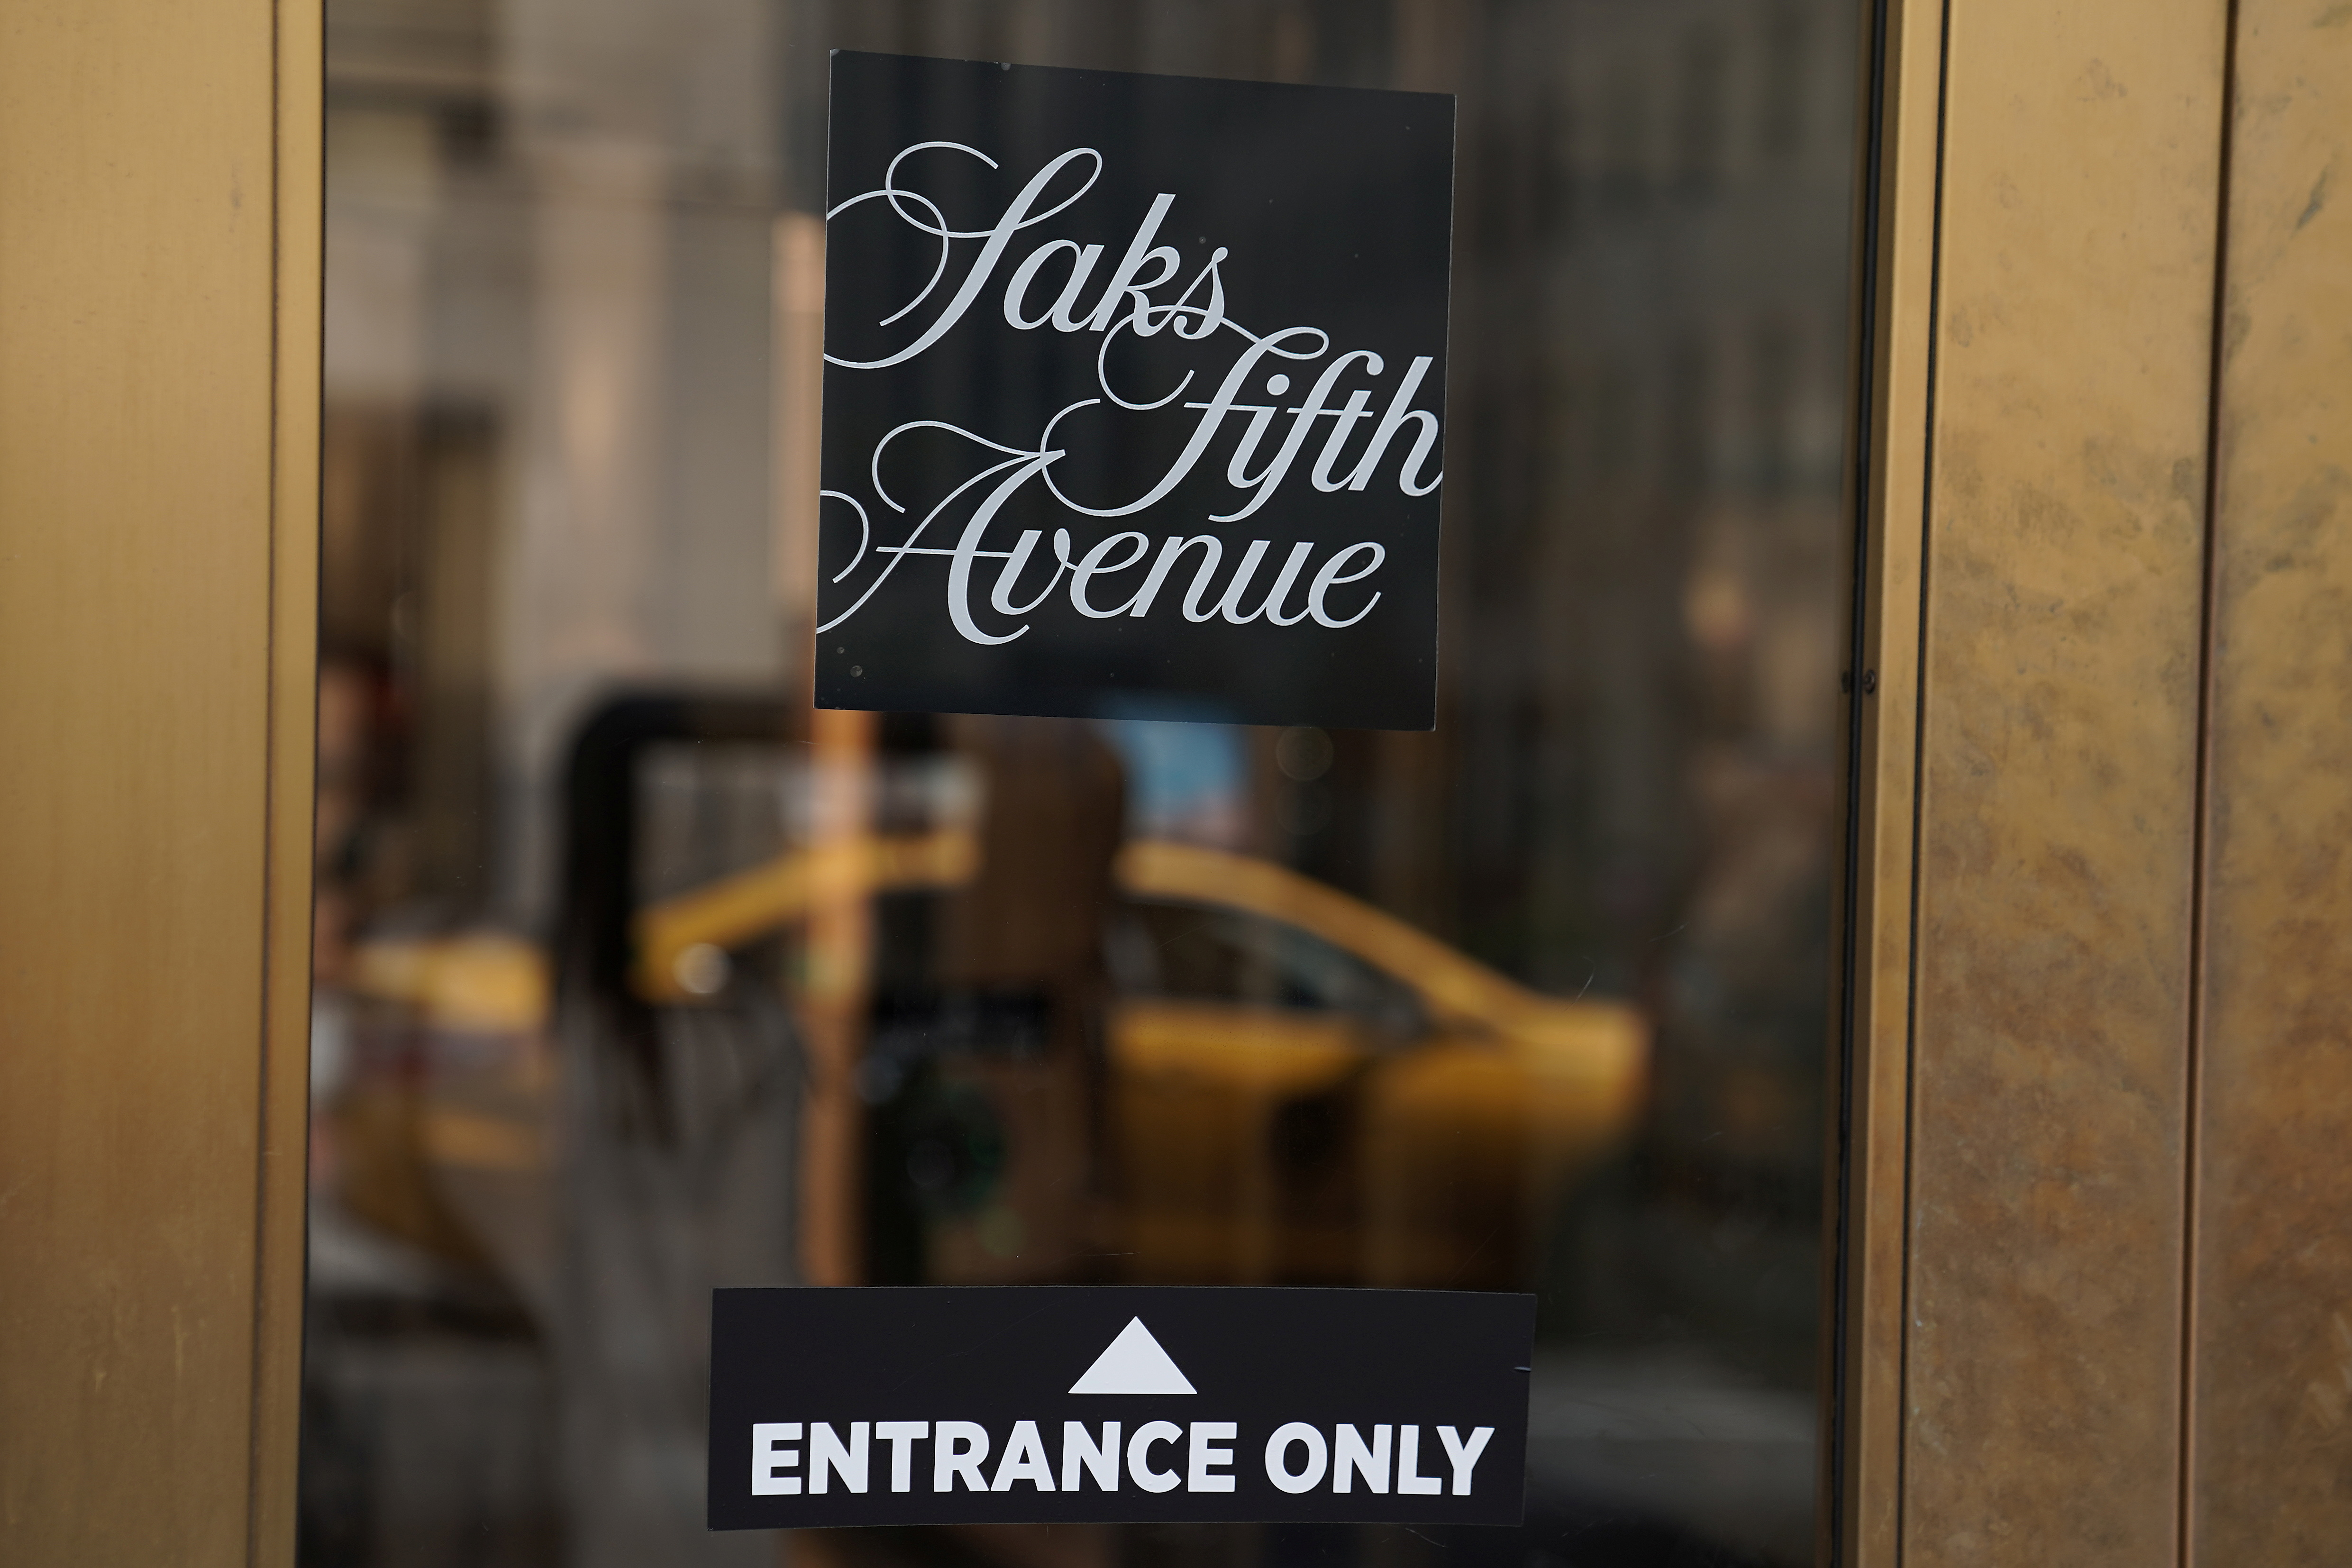 Must Read: Saks Fifth Avenue to Break From its Online Business